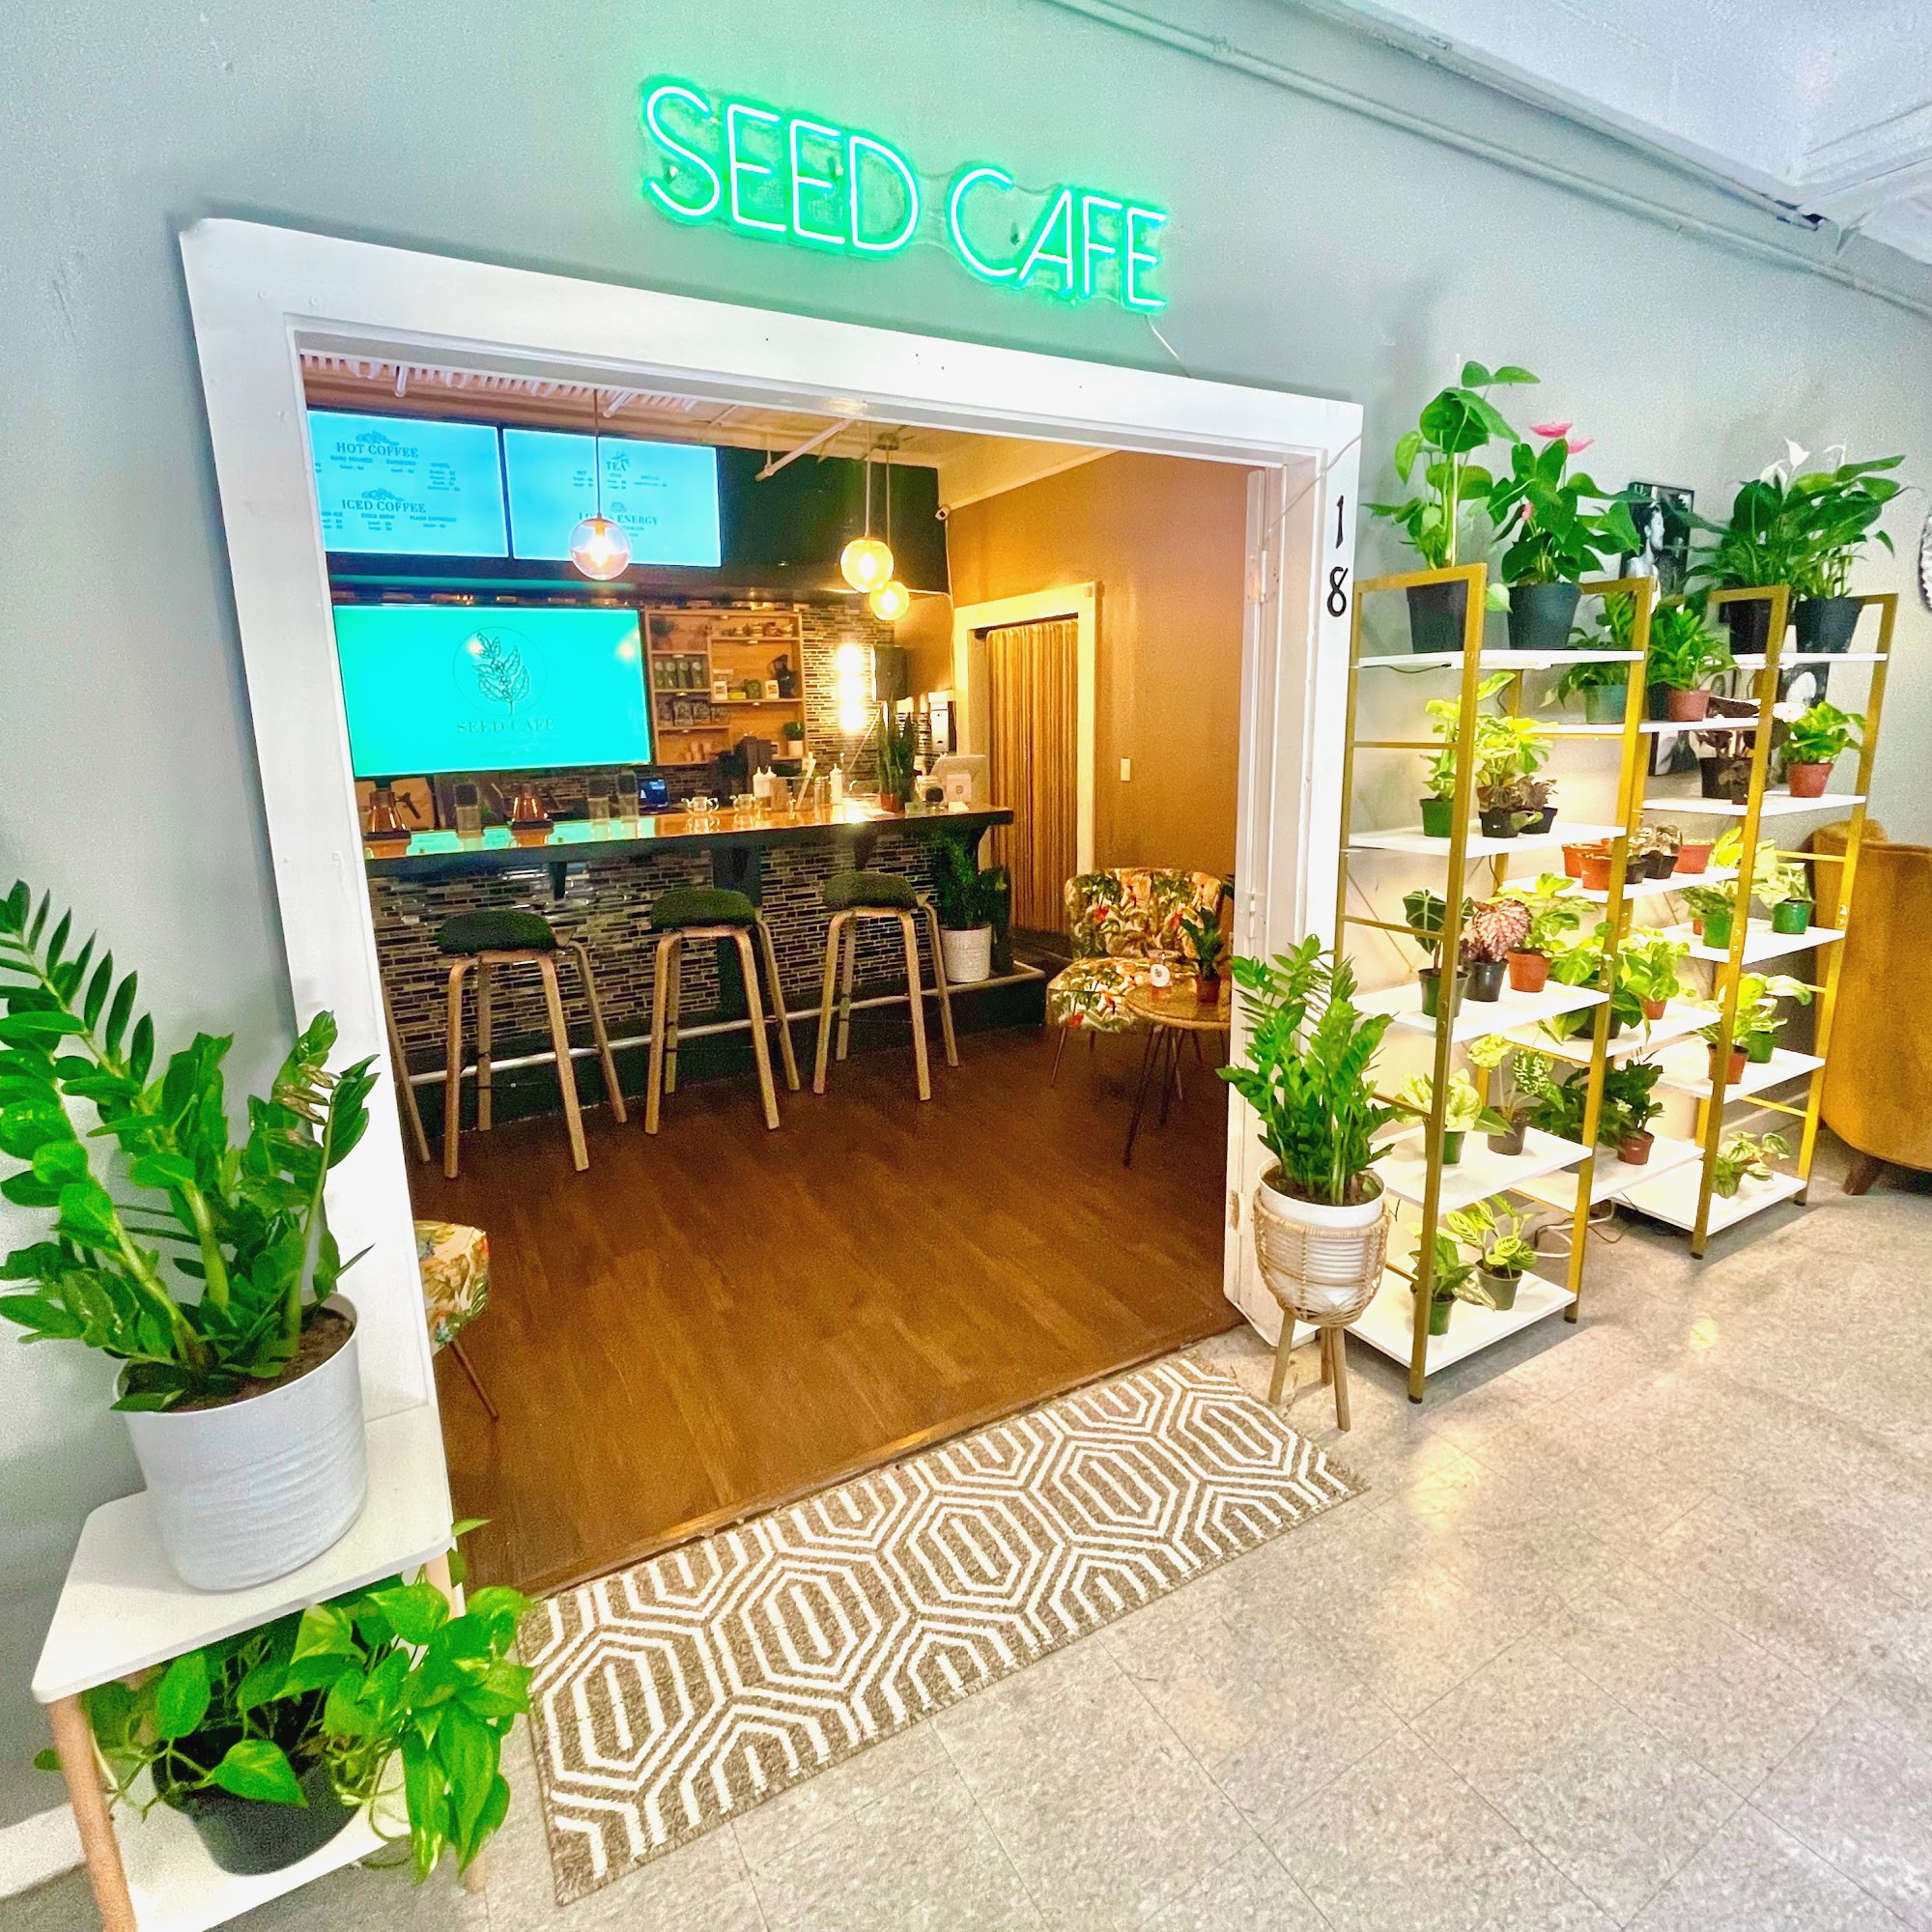 Seed Cafe and Espresso Bar